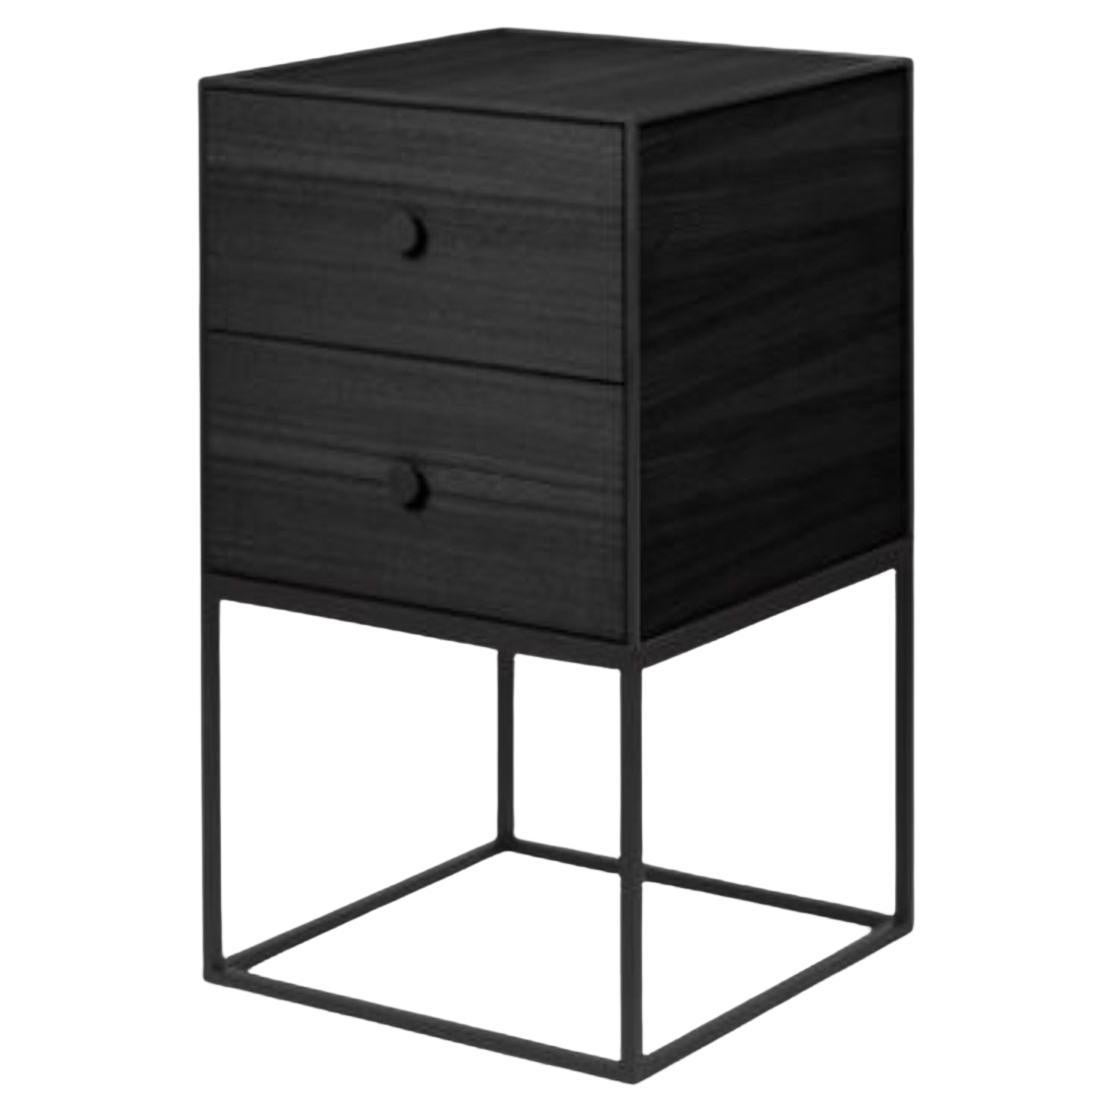 35 Black Ash Frame Sideboard with 2 Drawers by Lassen